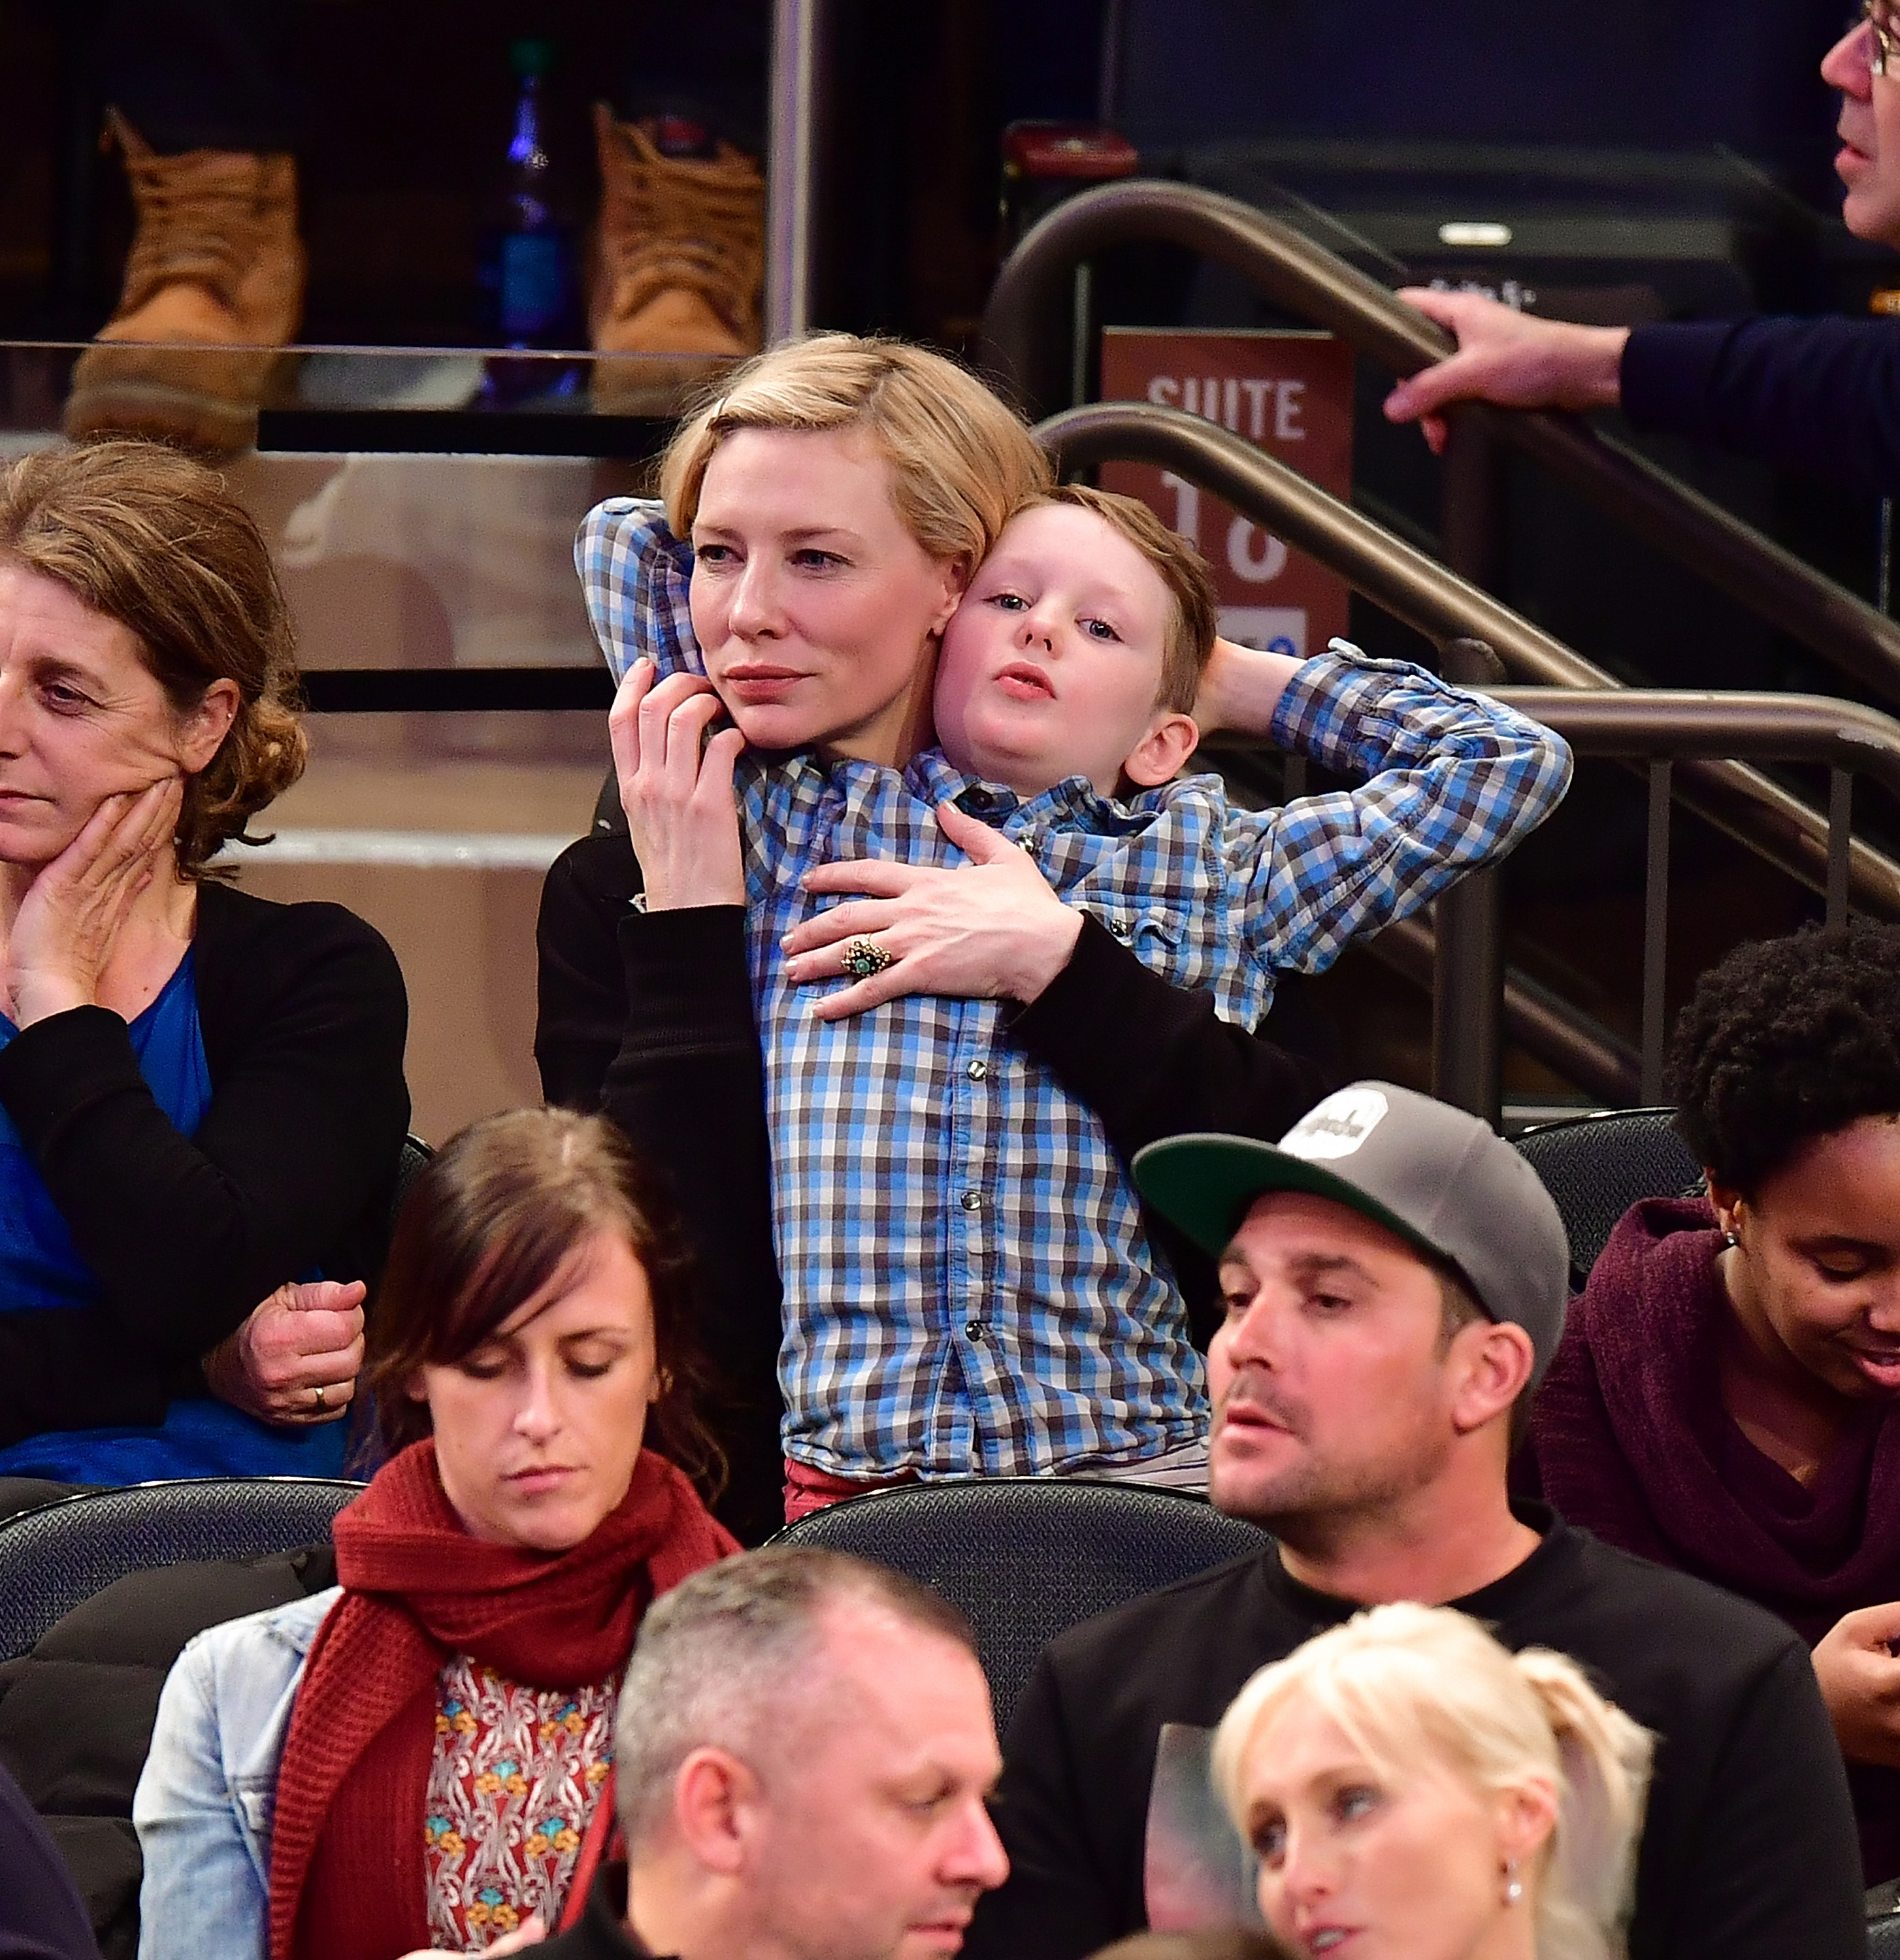 Cate Blanchett and Ignatius Upton at a basketball game on January 2, 2017, in New York City | Source: Getty Images